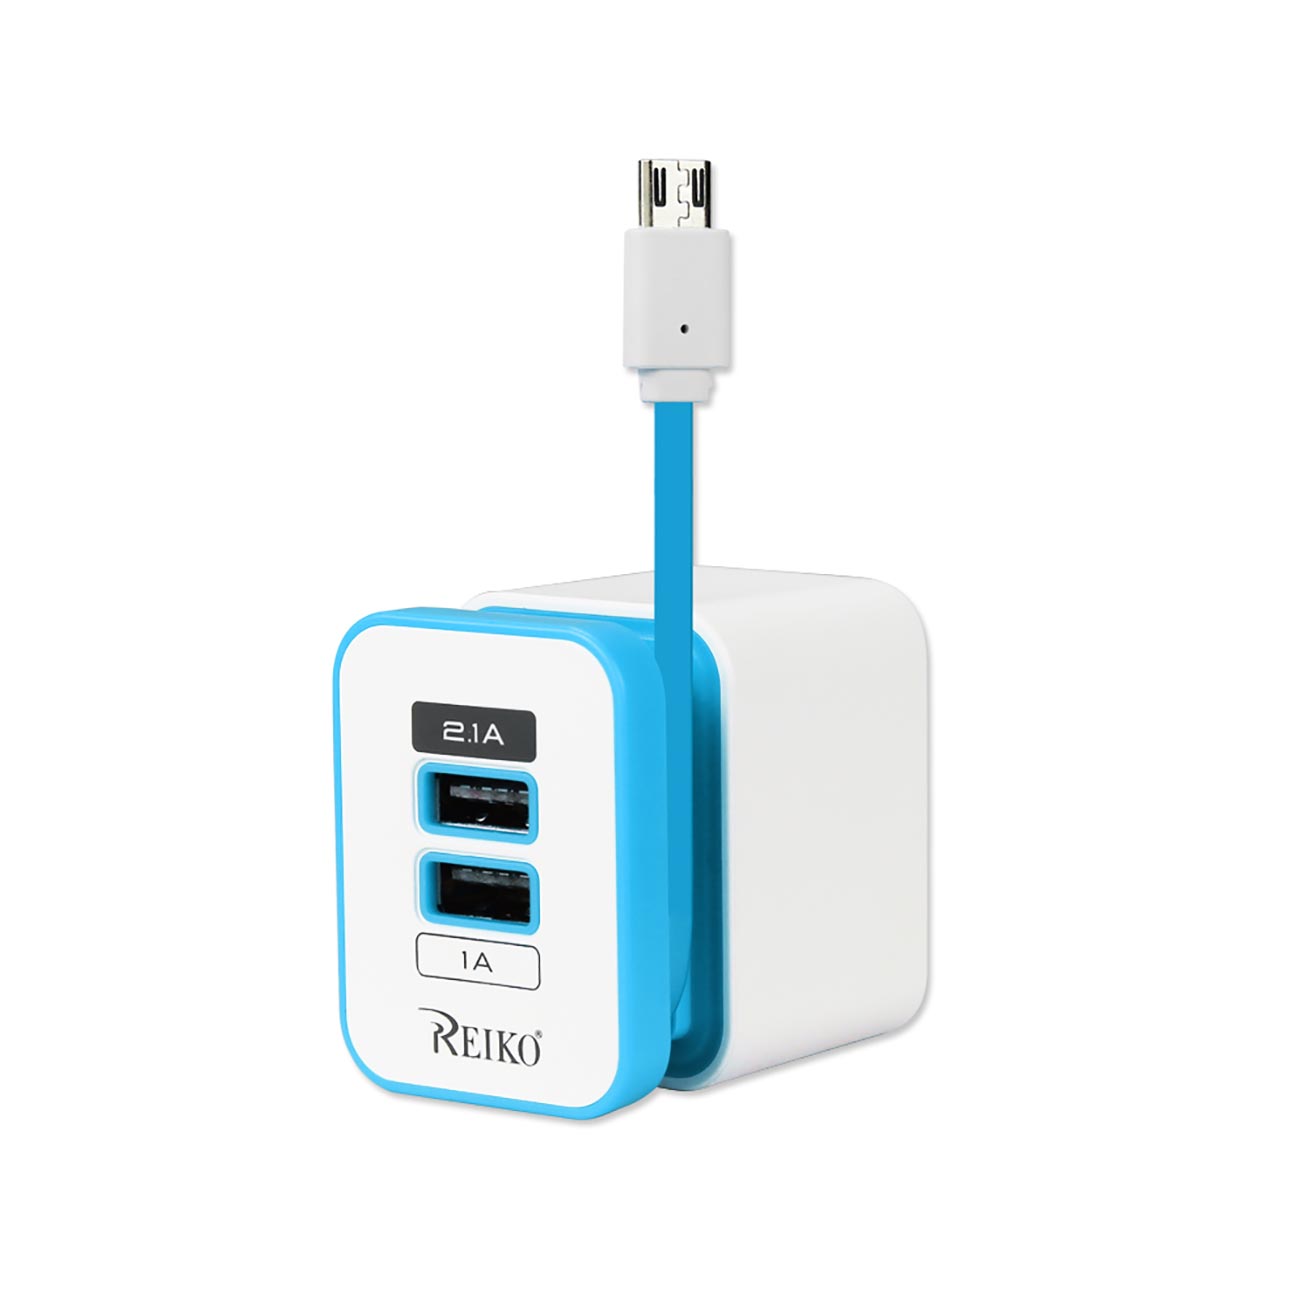 3.1 AMP Dual Port Portable Travel Adapter Charger In Blue